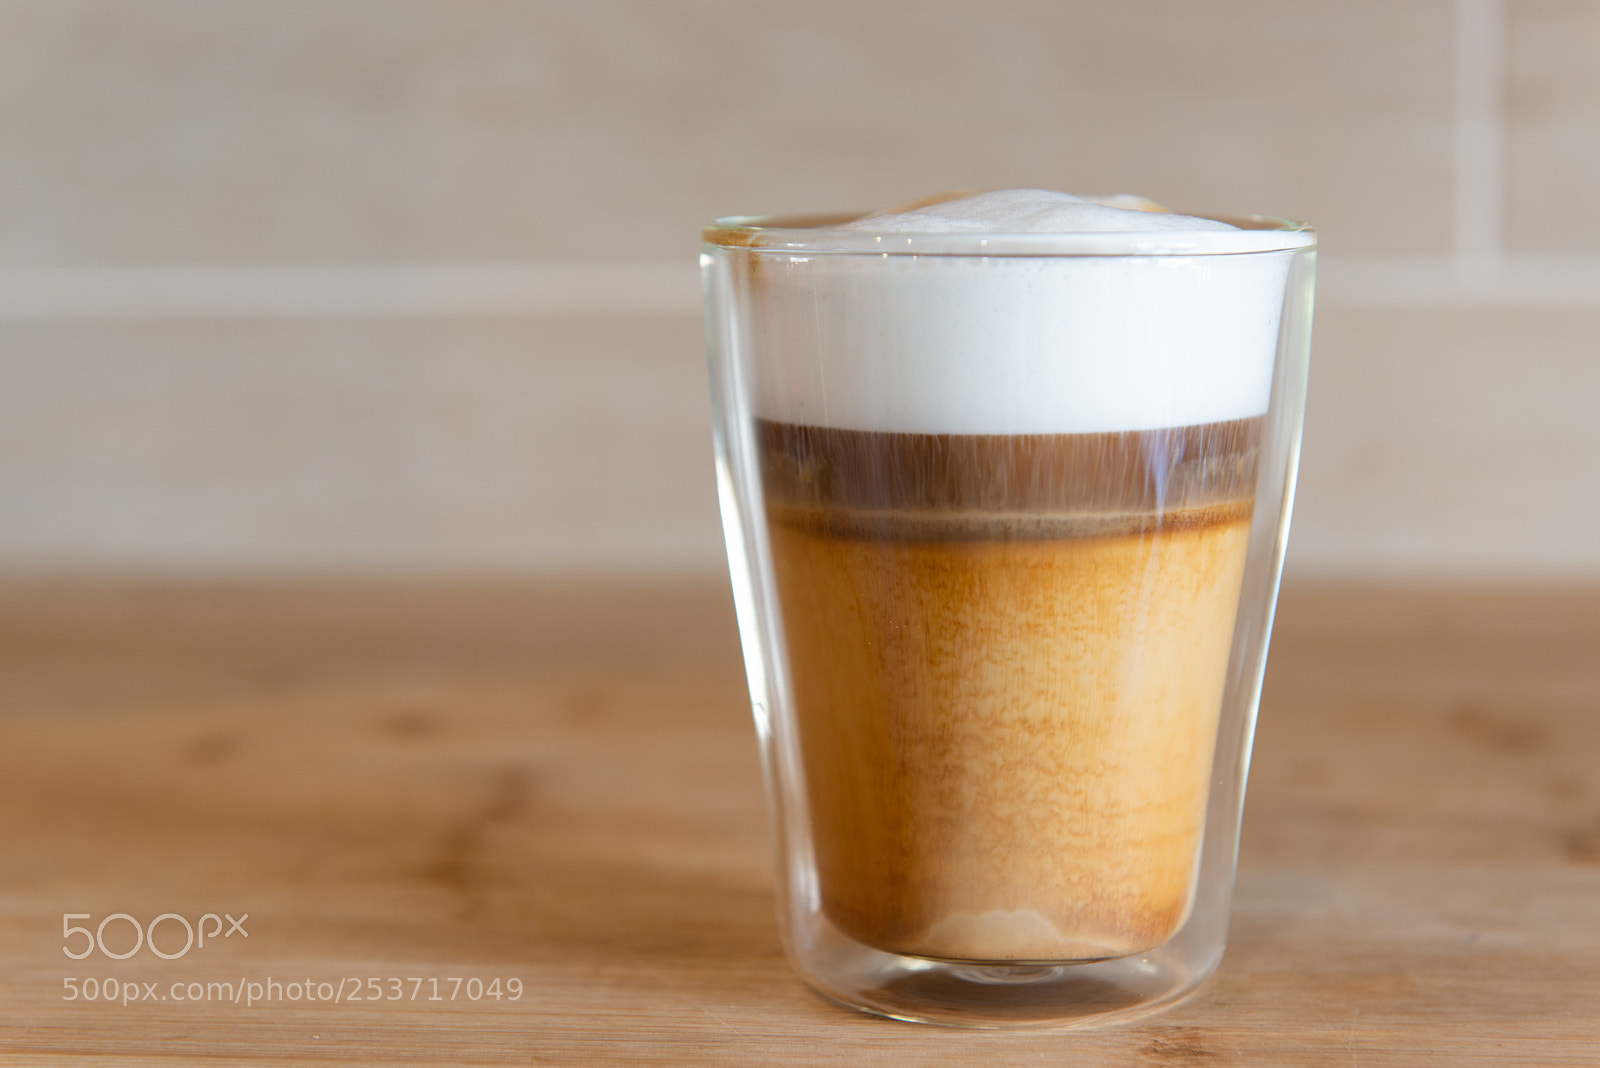 Nikon D800 sample photo. Multilayer coffee or cappuccino photography